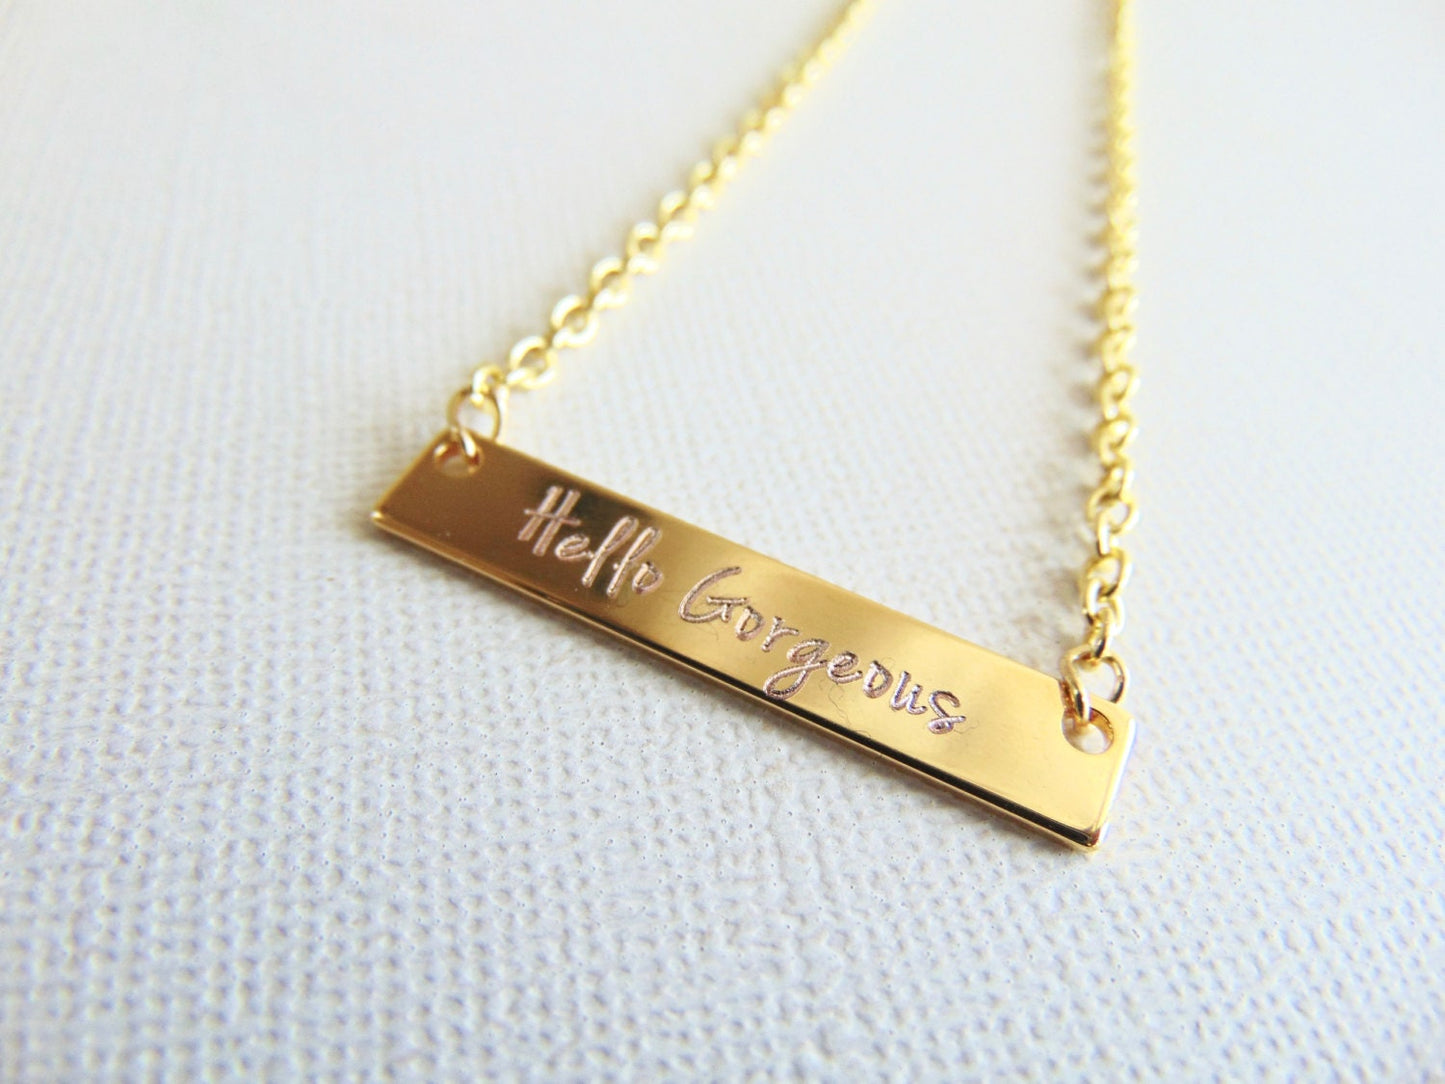 Personalized Nameplate Necklace, custom engraved name Bar necklace